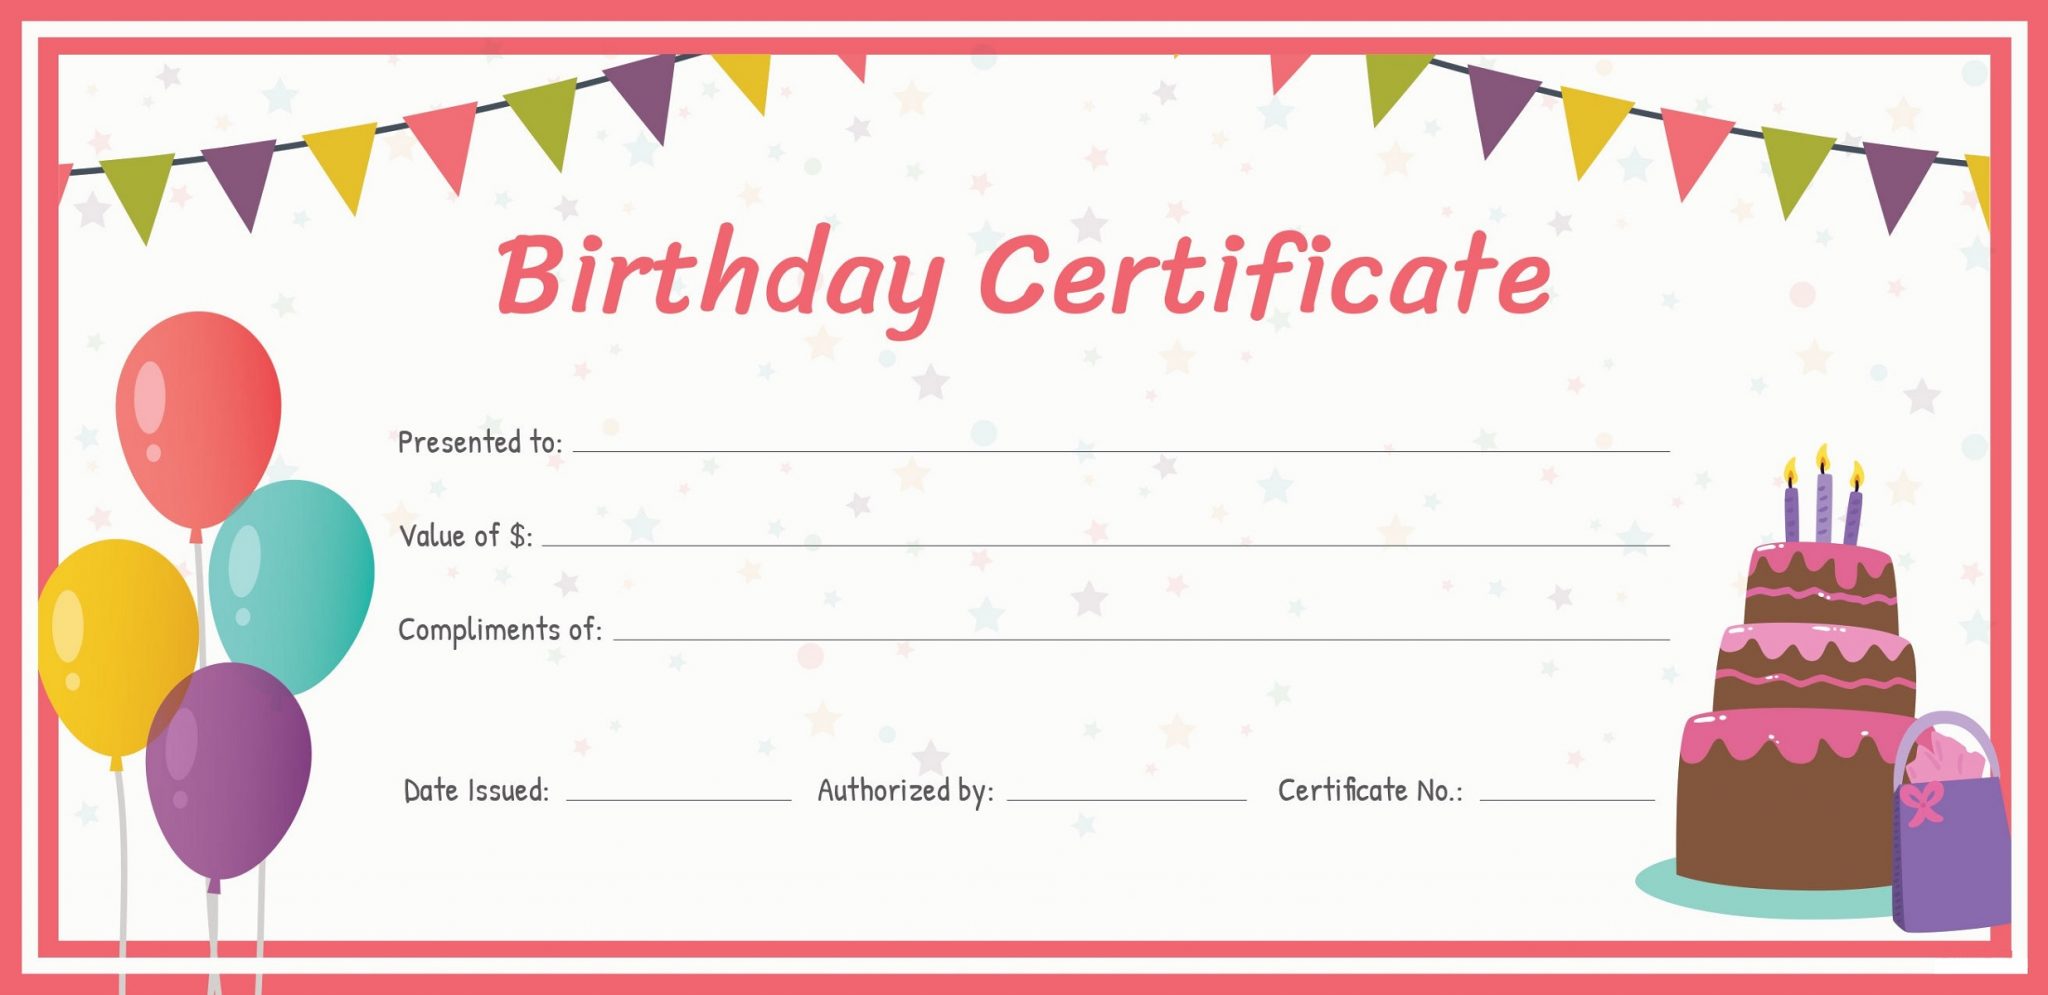 Gift Certificate Templates to Print for Free 101 Activity